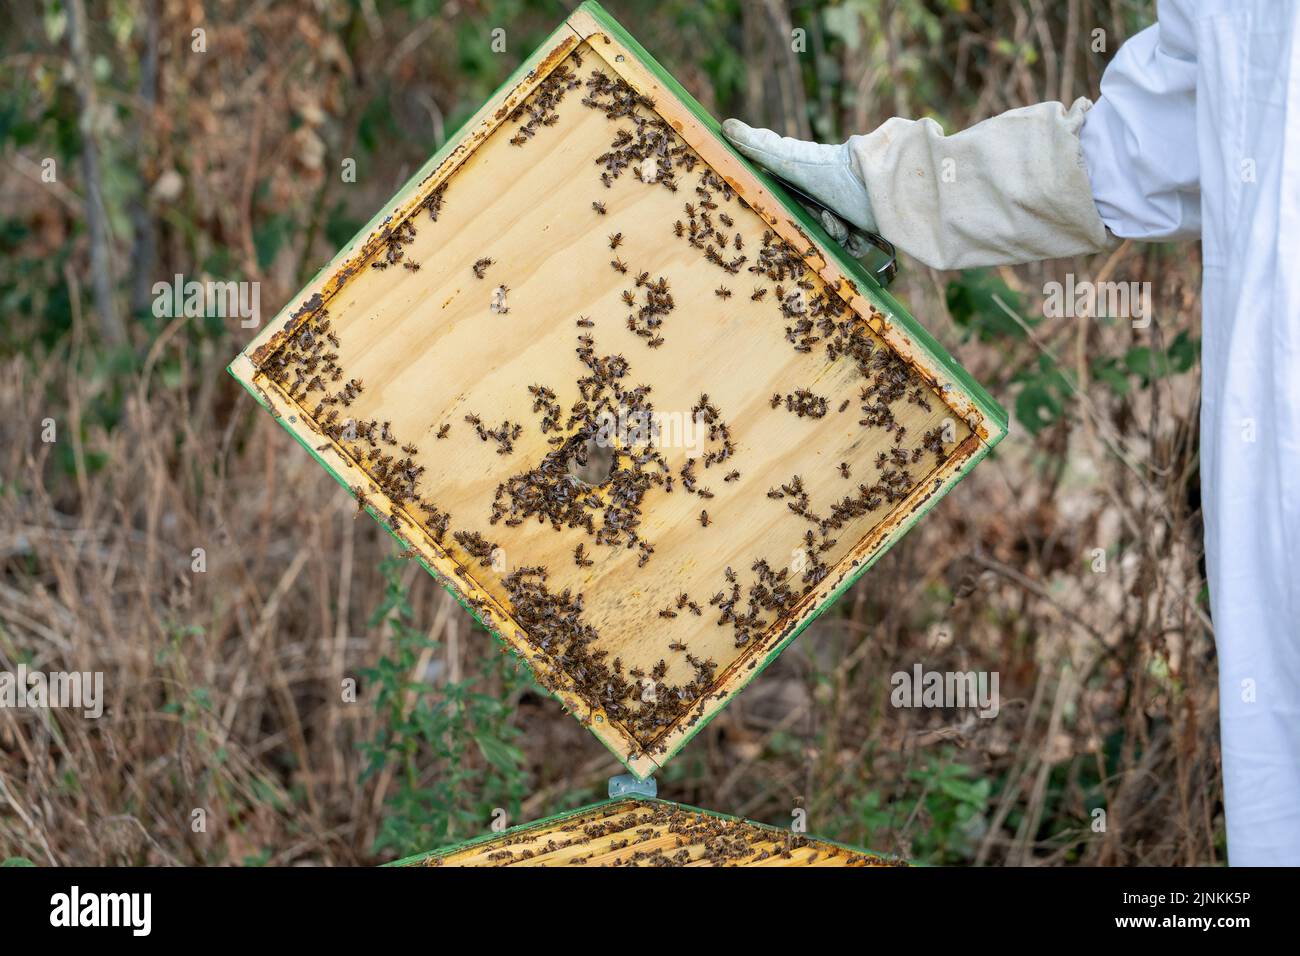 A beekeeper opens a green beehive with a natural bee colony inside. Stock Photo